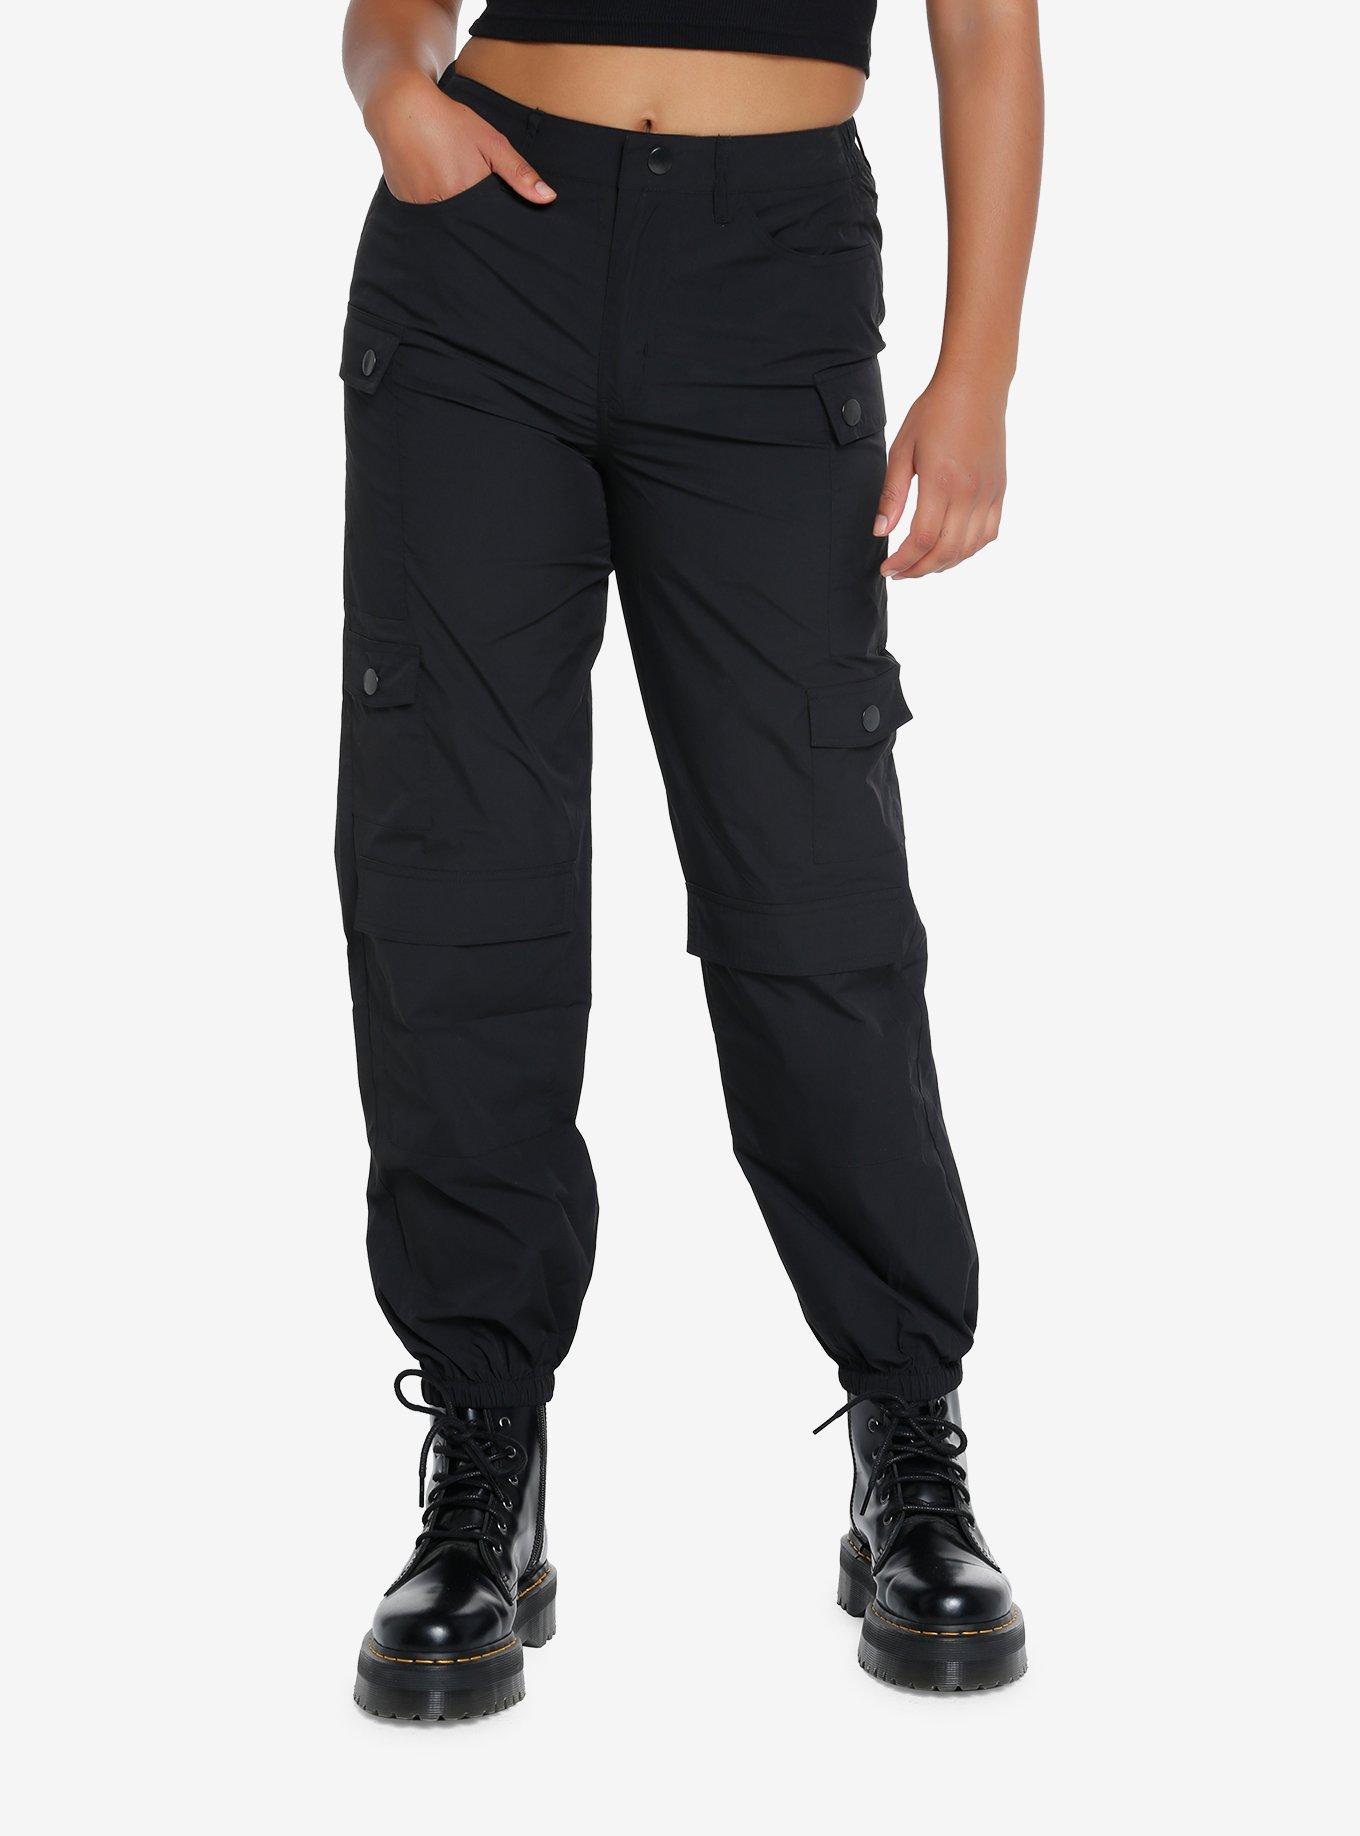 High Rise Cargo Sweatpants- Pink Berry